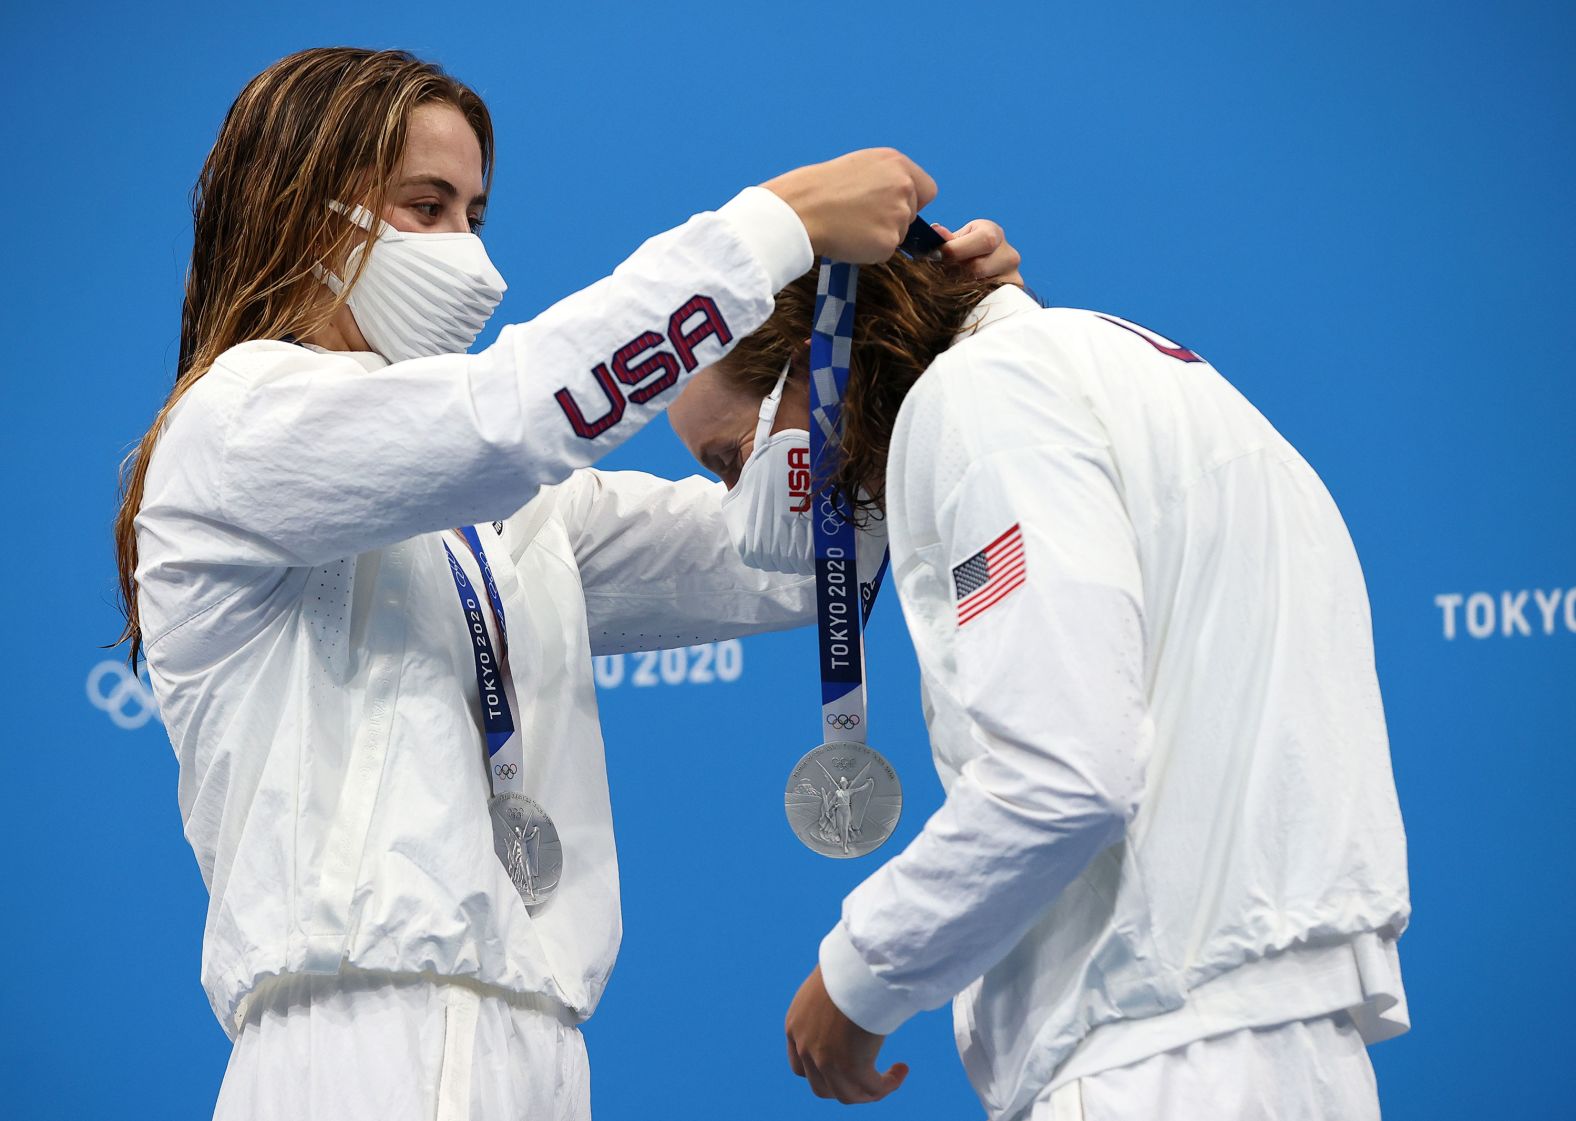 US swimmer Katie McLaughlin places a silver medal around the neck of teammate Katie Ledecky after the 4x200-meter freestyle relay on July 29. The International Olympic Committee created a contactless medal ceremony, asking athletes to put their medals on themselves. Some athletes have been <a href="index.php?page=&url=https%3A%2F%2Fwww.cnn.com%2Fworld%2Flive-news%2Ftokyo-2020-olympics-07-29-21-spt%2Fh_f28d5e8948c5b62f6965c00dcfd35a2f" target="_blank">putting the medal on their teammates.</a>